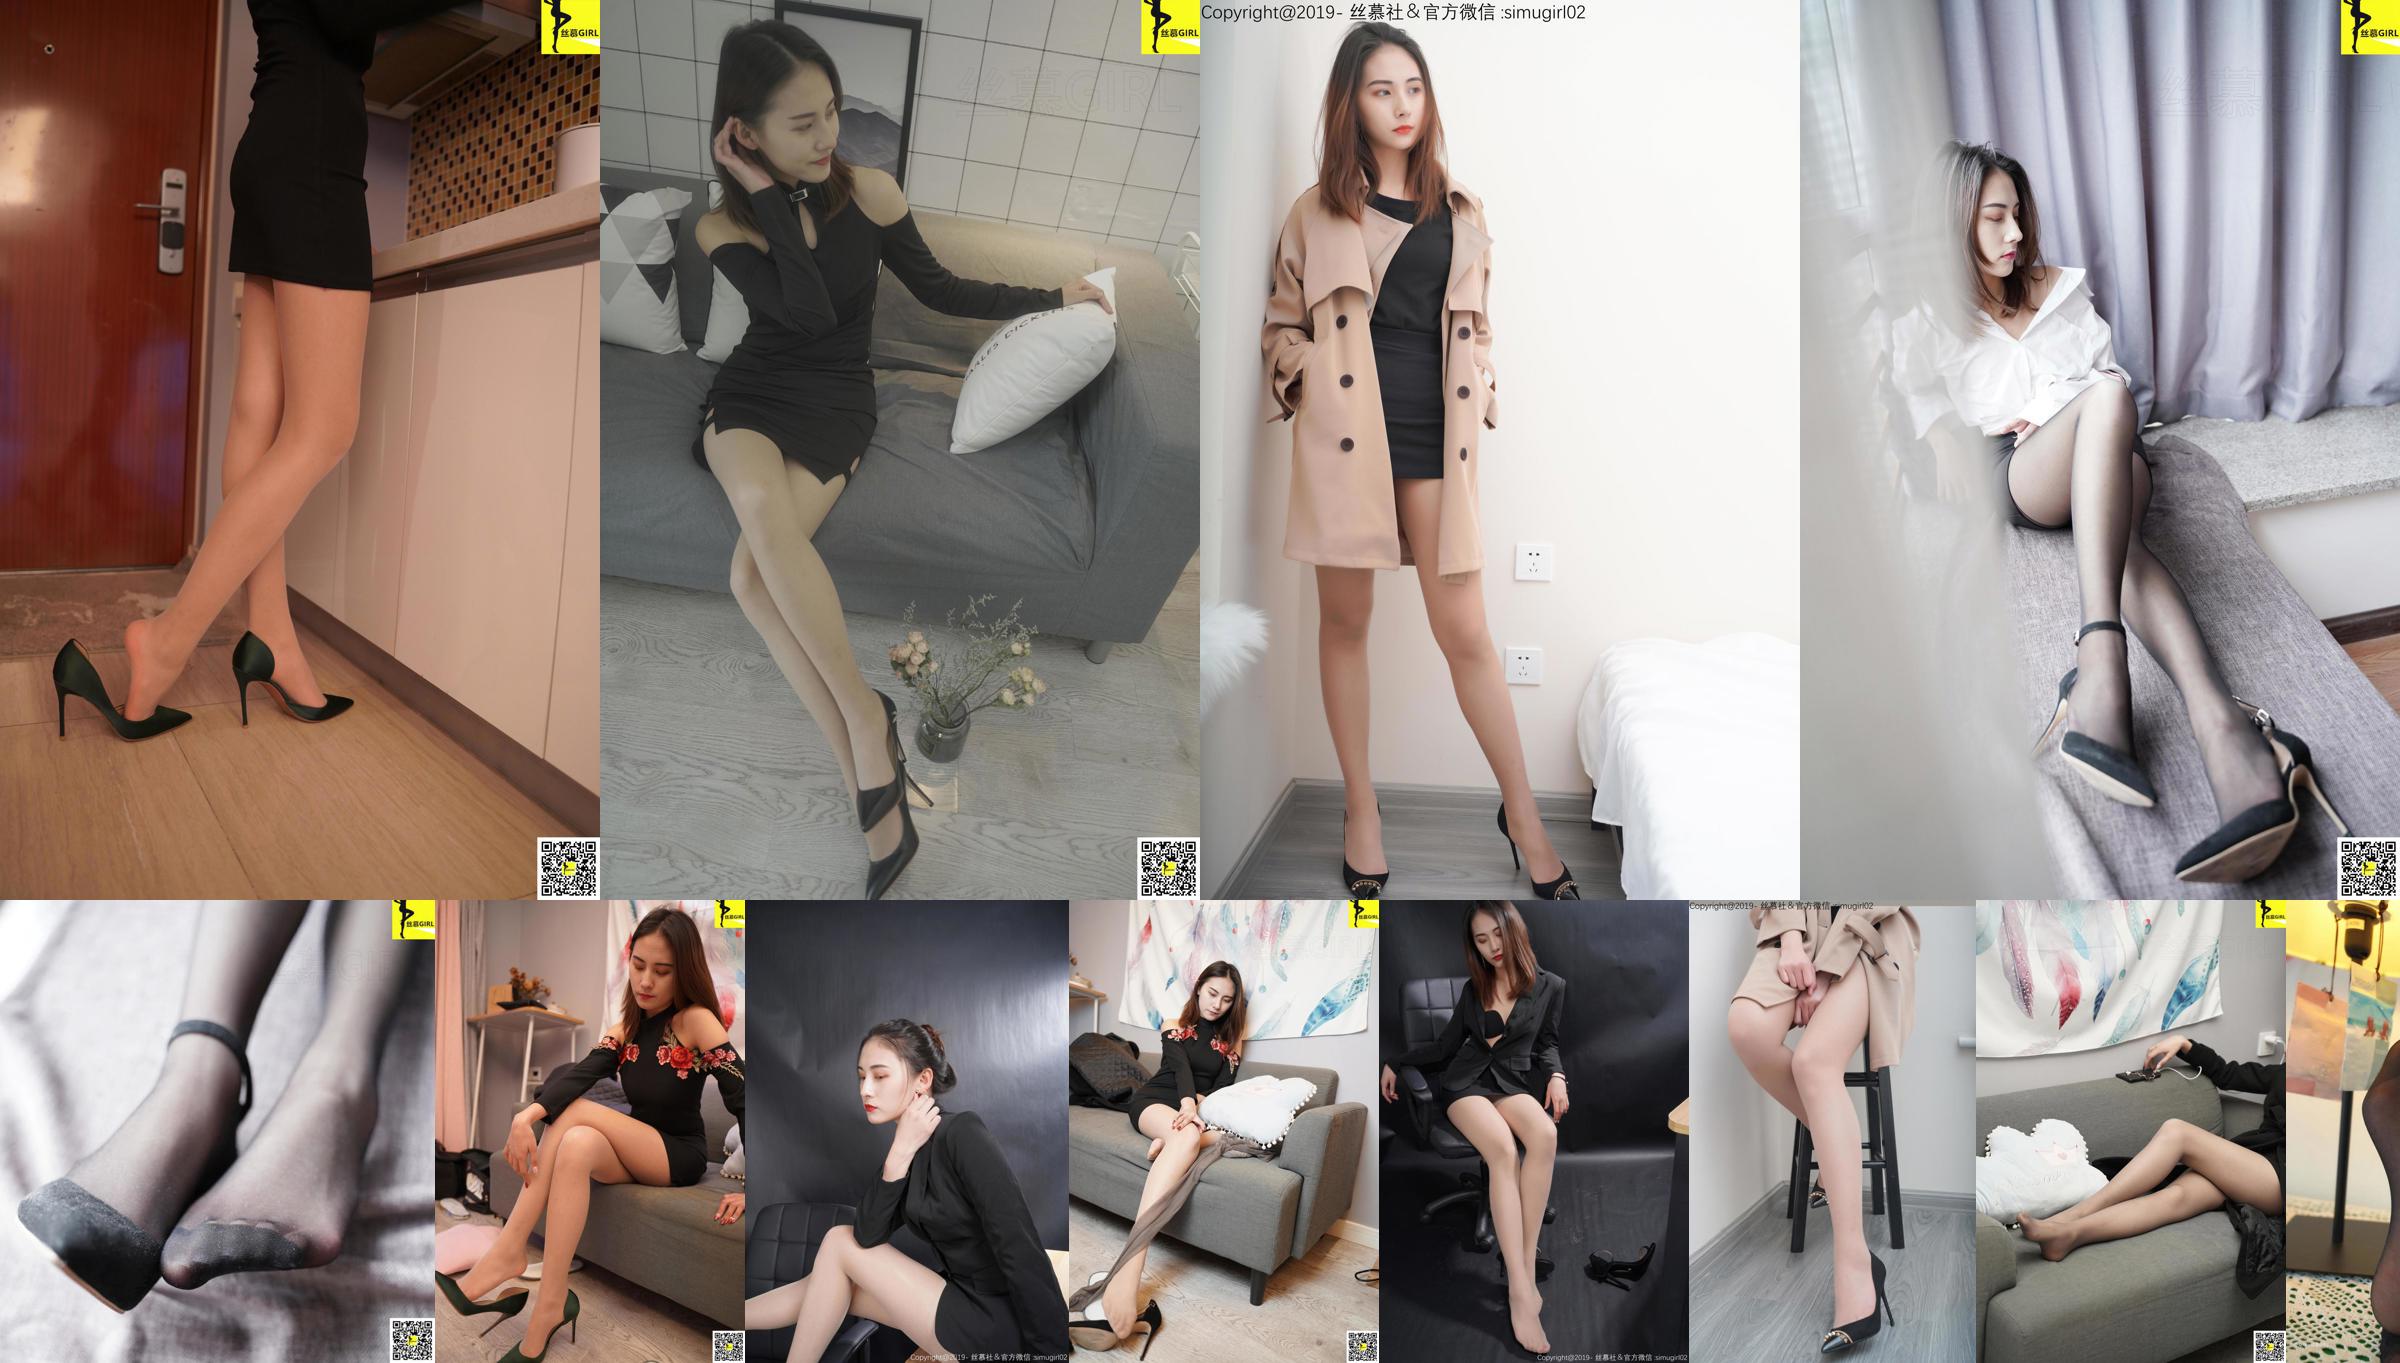 [Simu] Issue 048 Ting Yi "Satisfaction" No.b5e987 Page 3